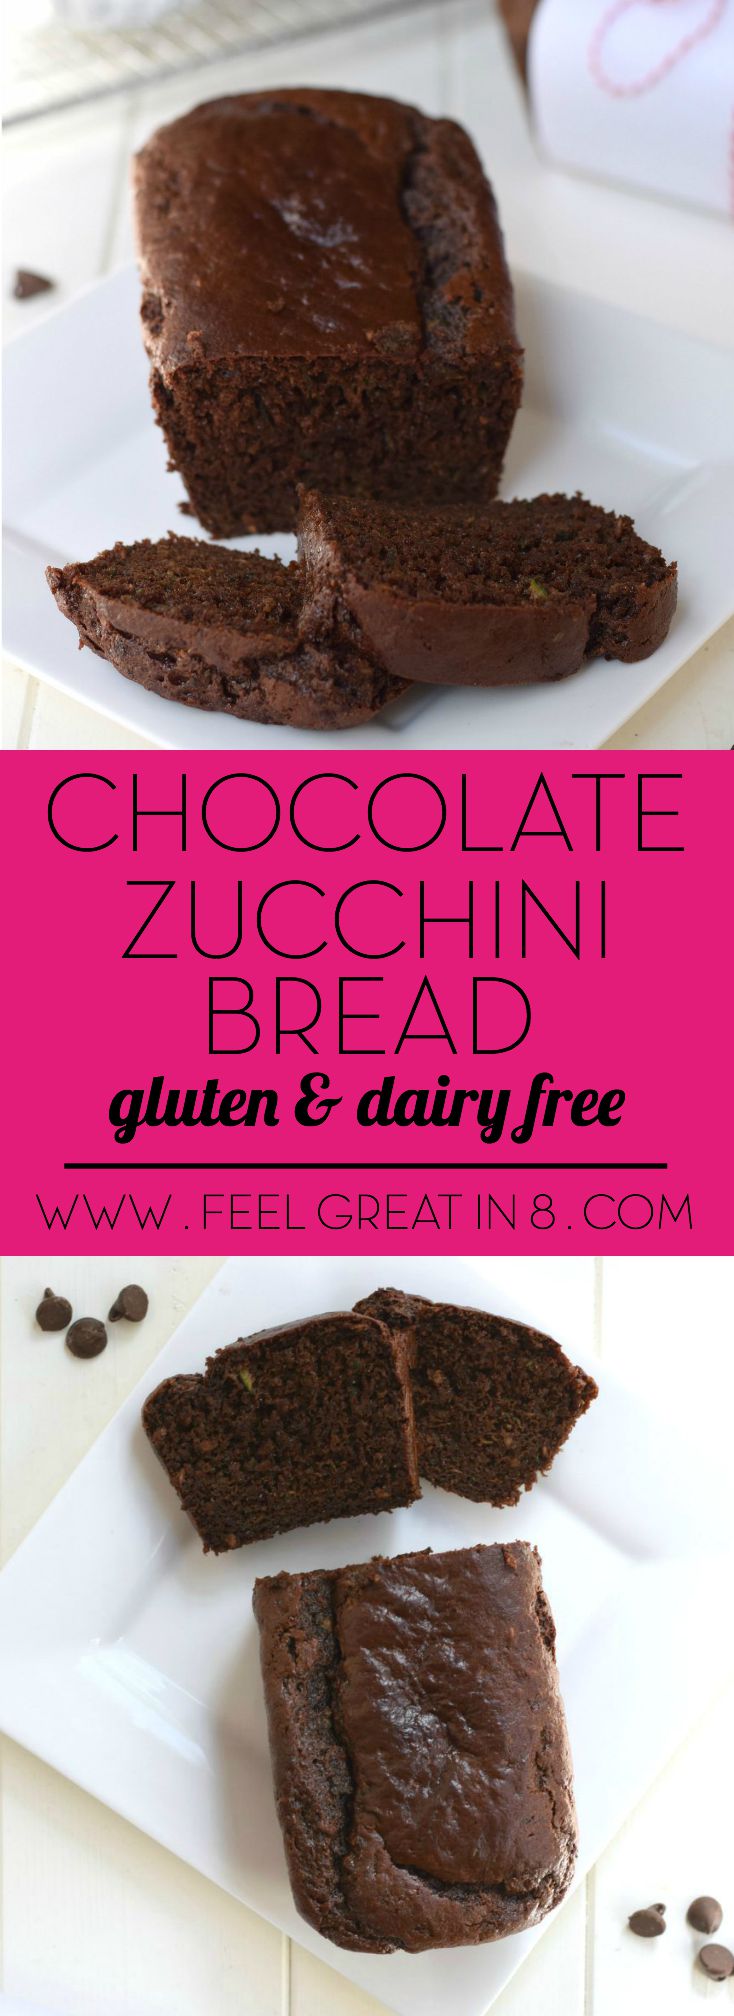  This Chocolate Zucchini Bread is so moist and delicious, you'd never guess it is gluten free, dairy free, high in protein and fiber, and has no refined sugar! | Feel Great in 8